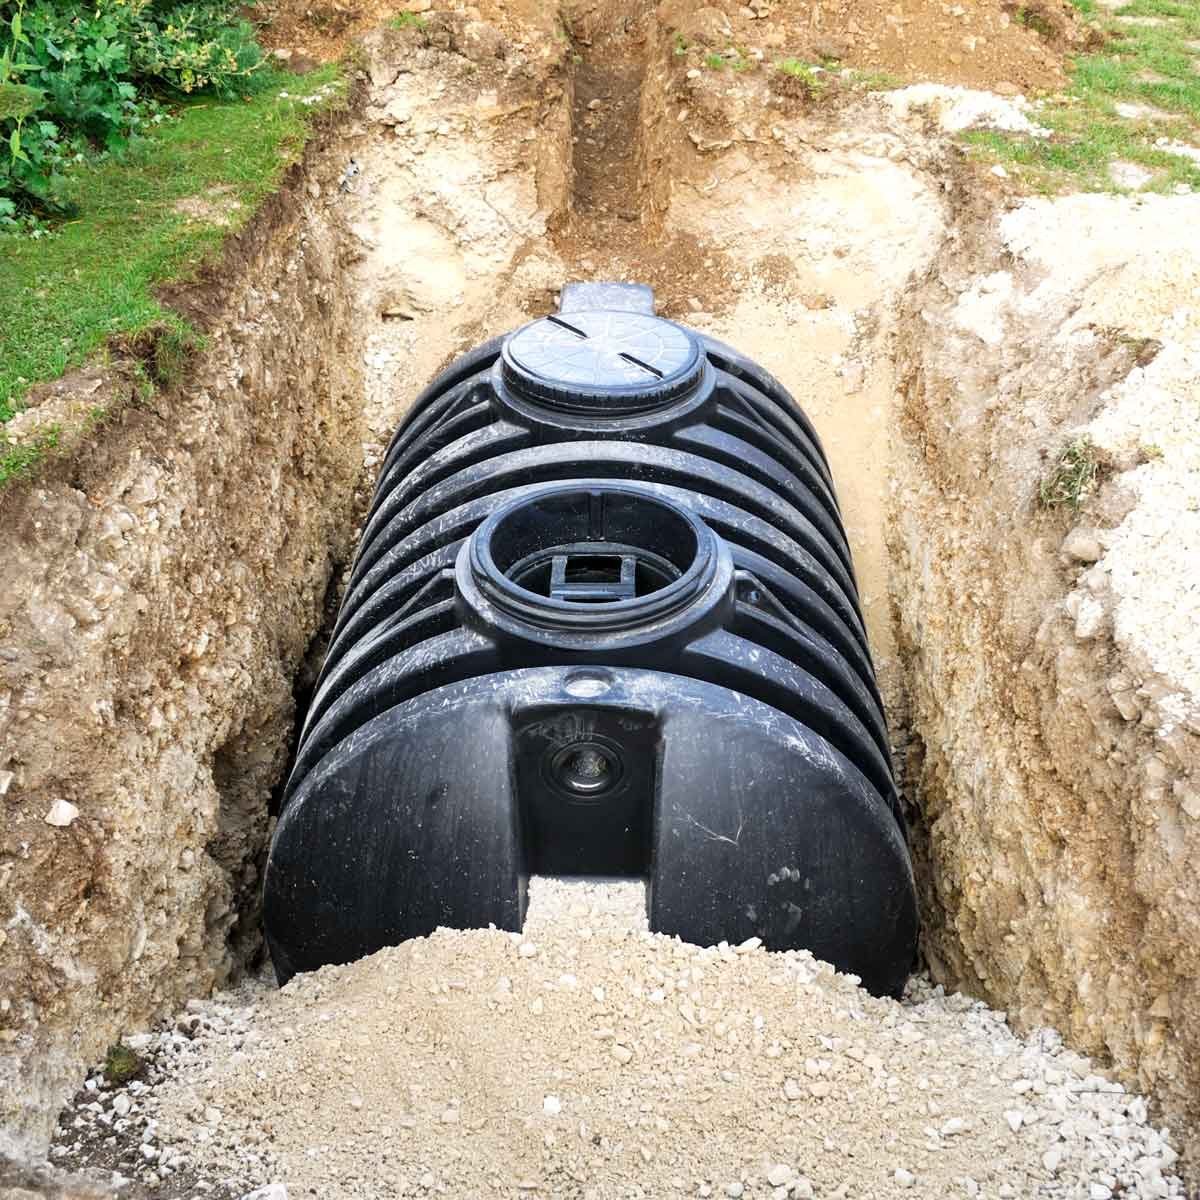 Will Too Much Toilet Paper Harm My Septic Tank?